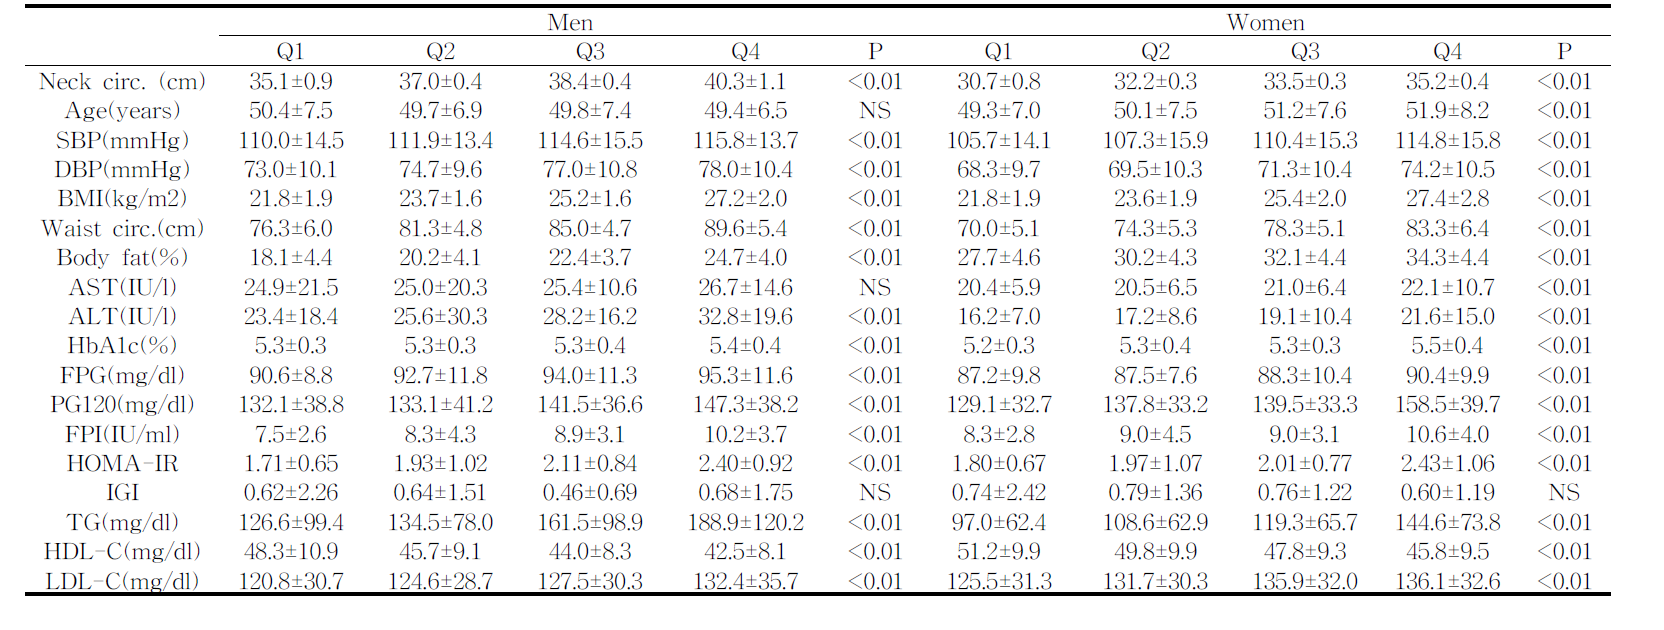 Anthropometric and biochemical parameters in accordance to quartiles of neck circumference by gender